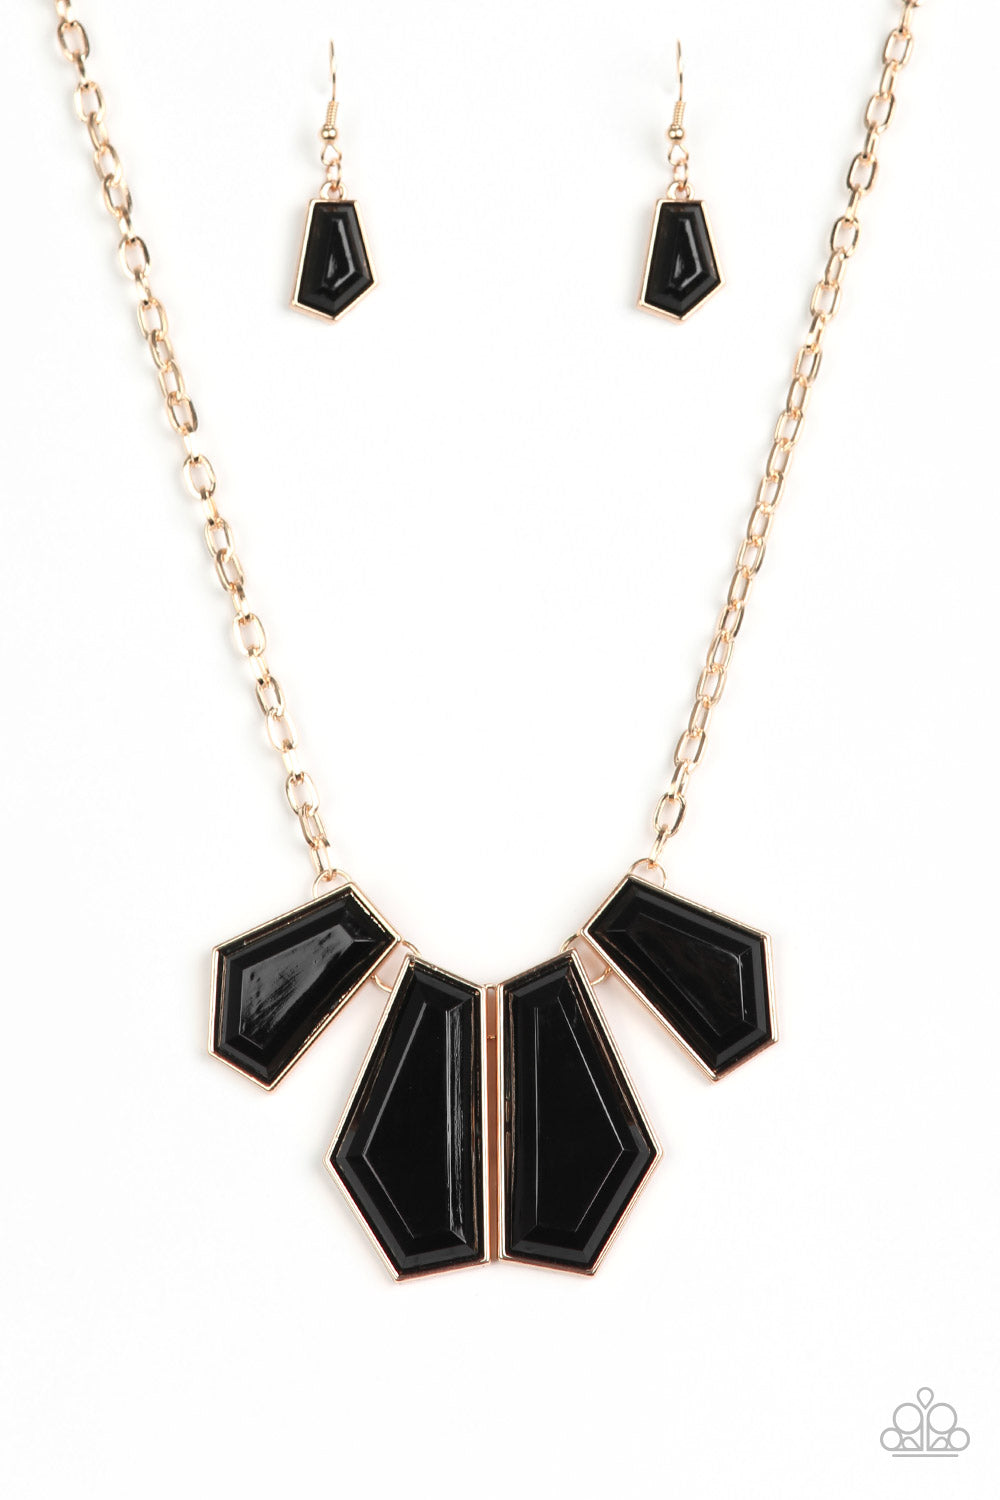 Get Up And GEO - Gold Necklace - TheMasterCollection